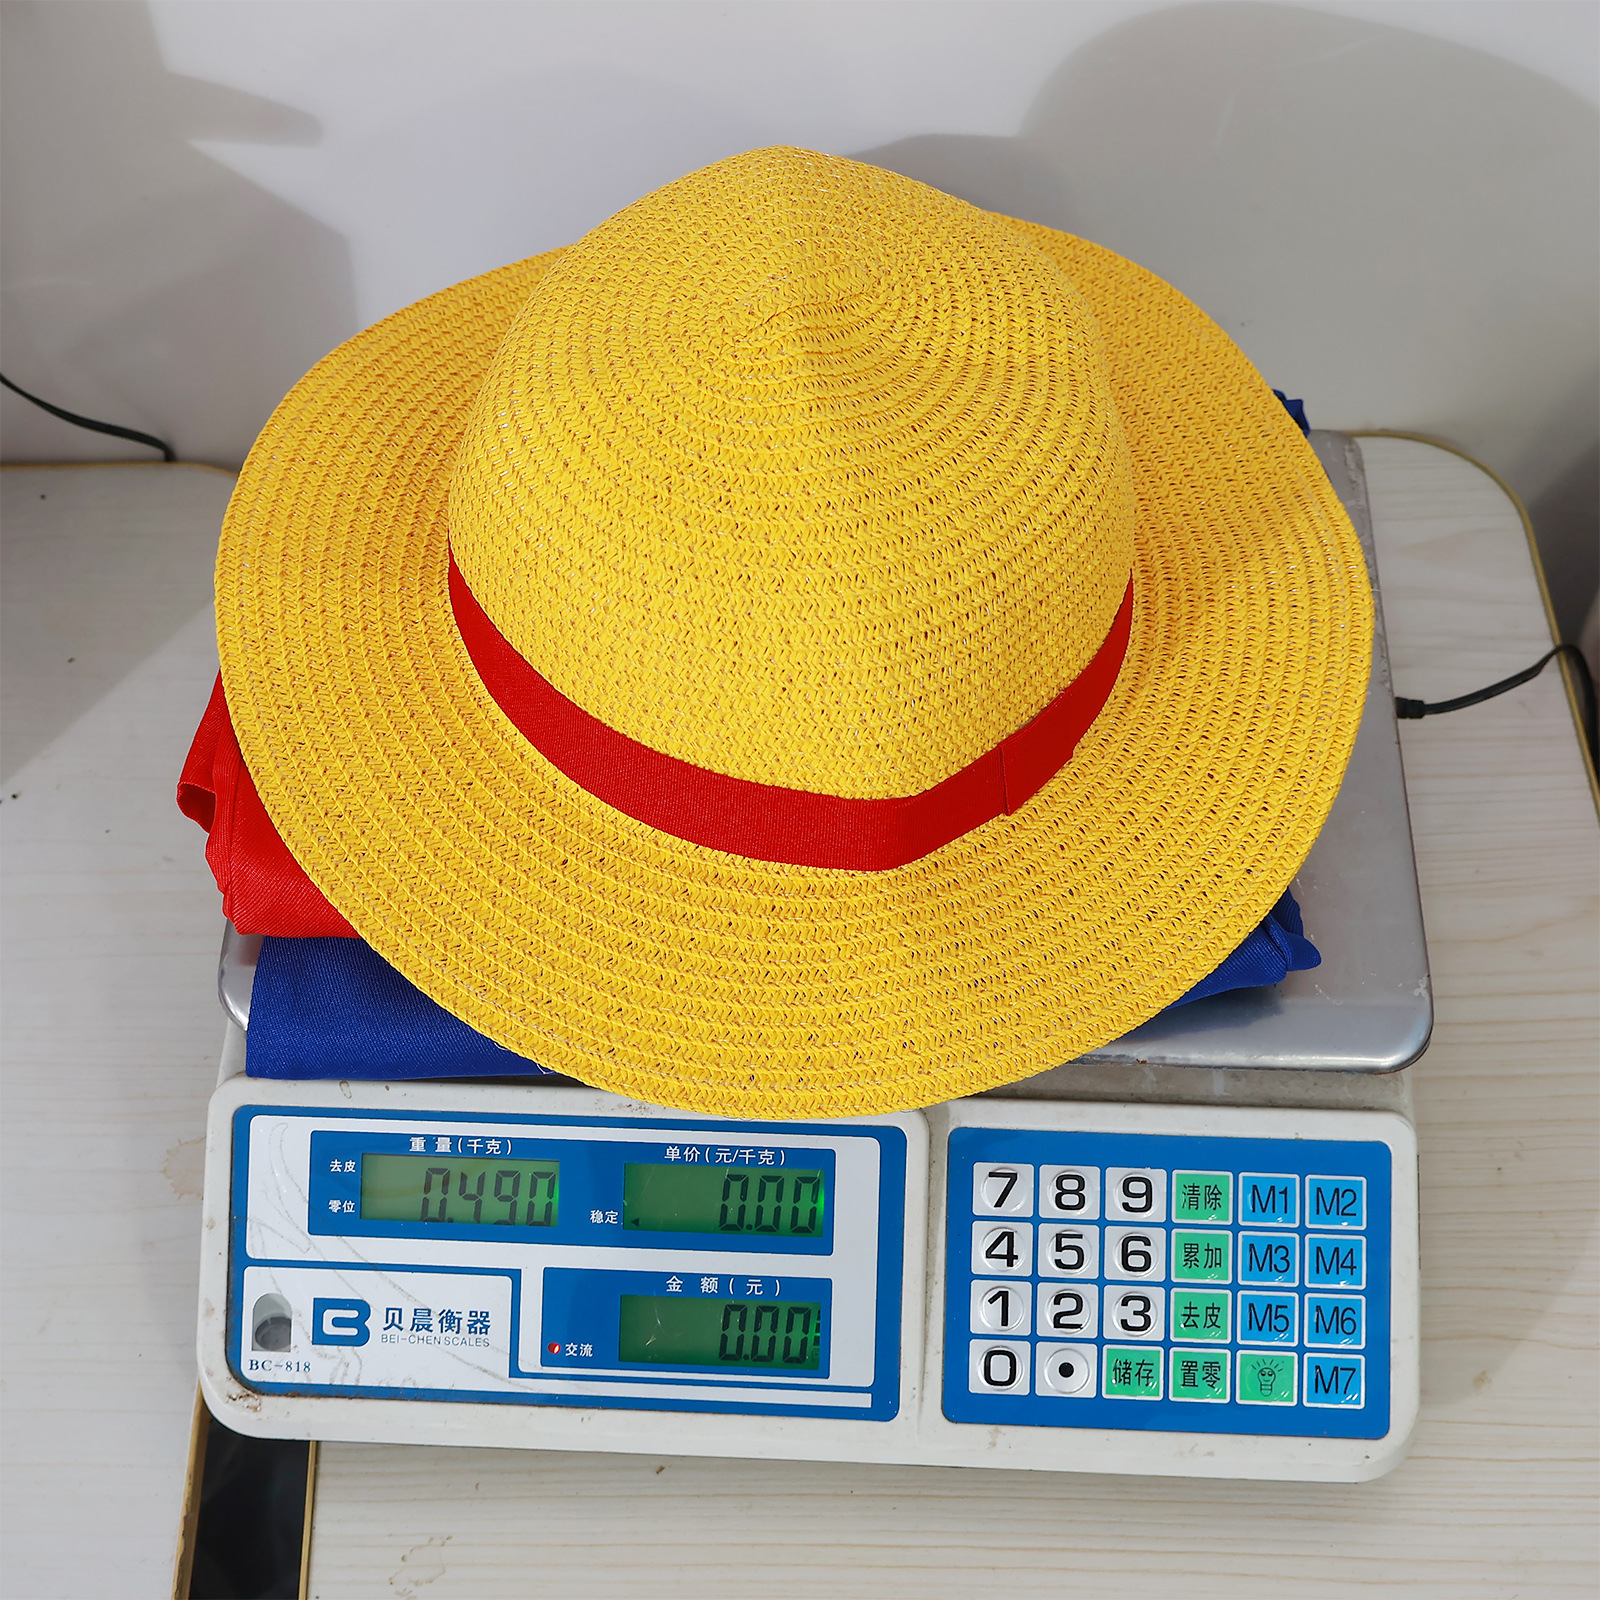 One Piece Luffy's second-generation Straw Hat Luffy cosplay costume two years later